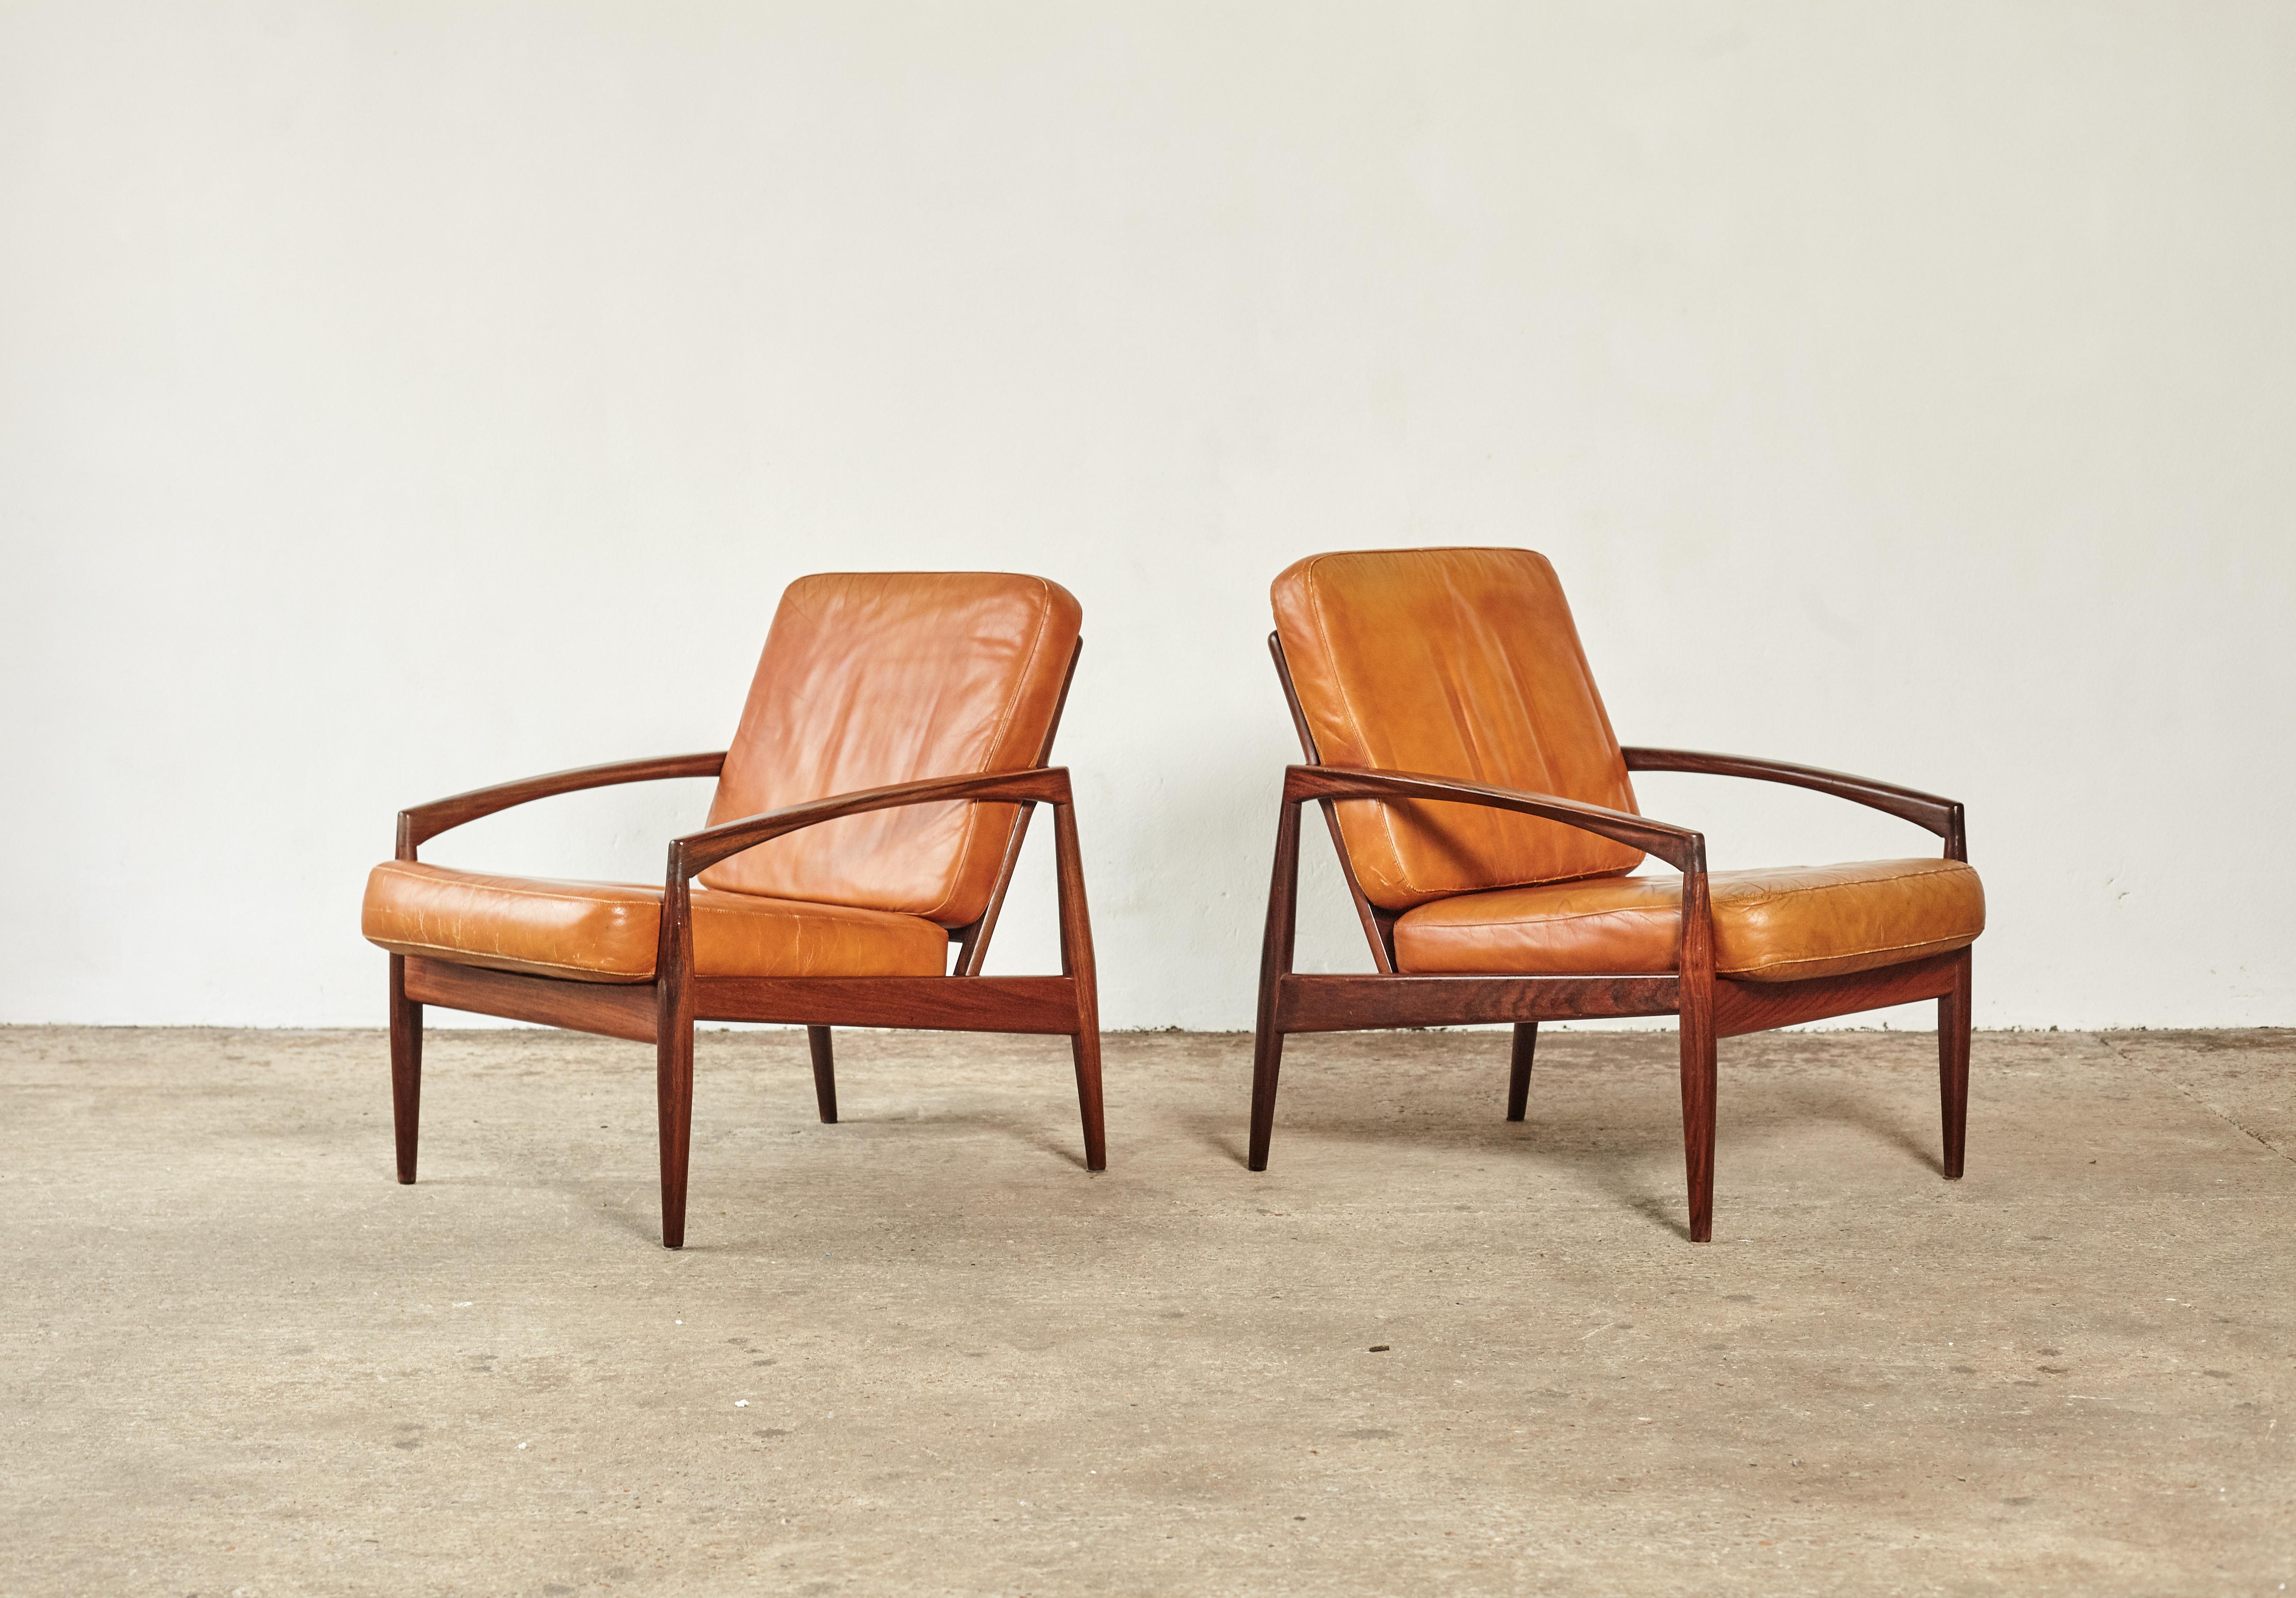 A super pair of rare rosewood Kai Kristiansen paper knife chairs, produced by Magnus Olesen, Denmark, 1960s. Rosewood frames in great condition and original patinated cognac leather cushions. The cushions are loose so easy to recover in an